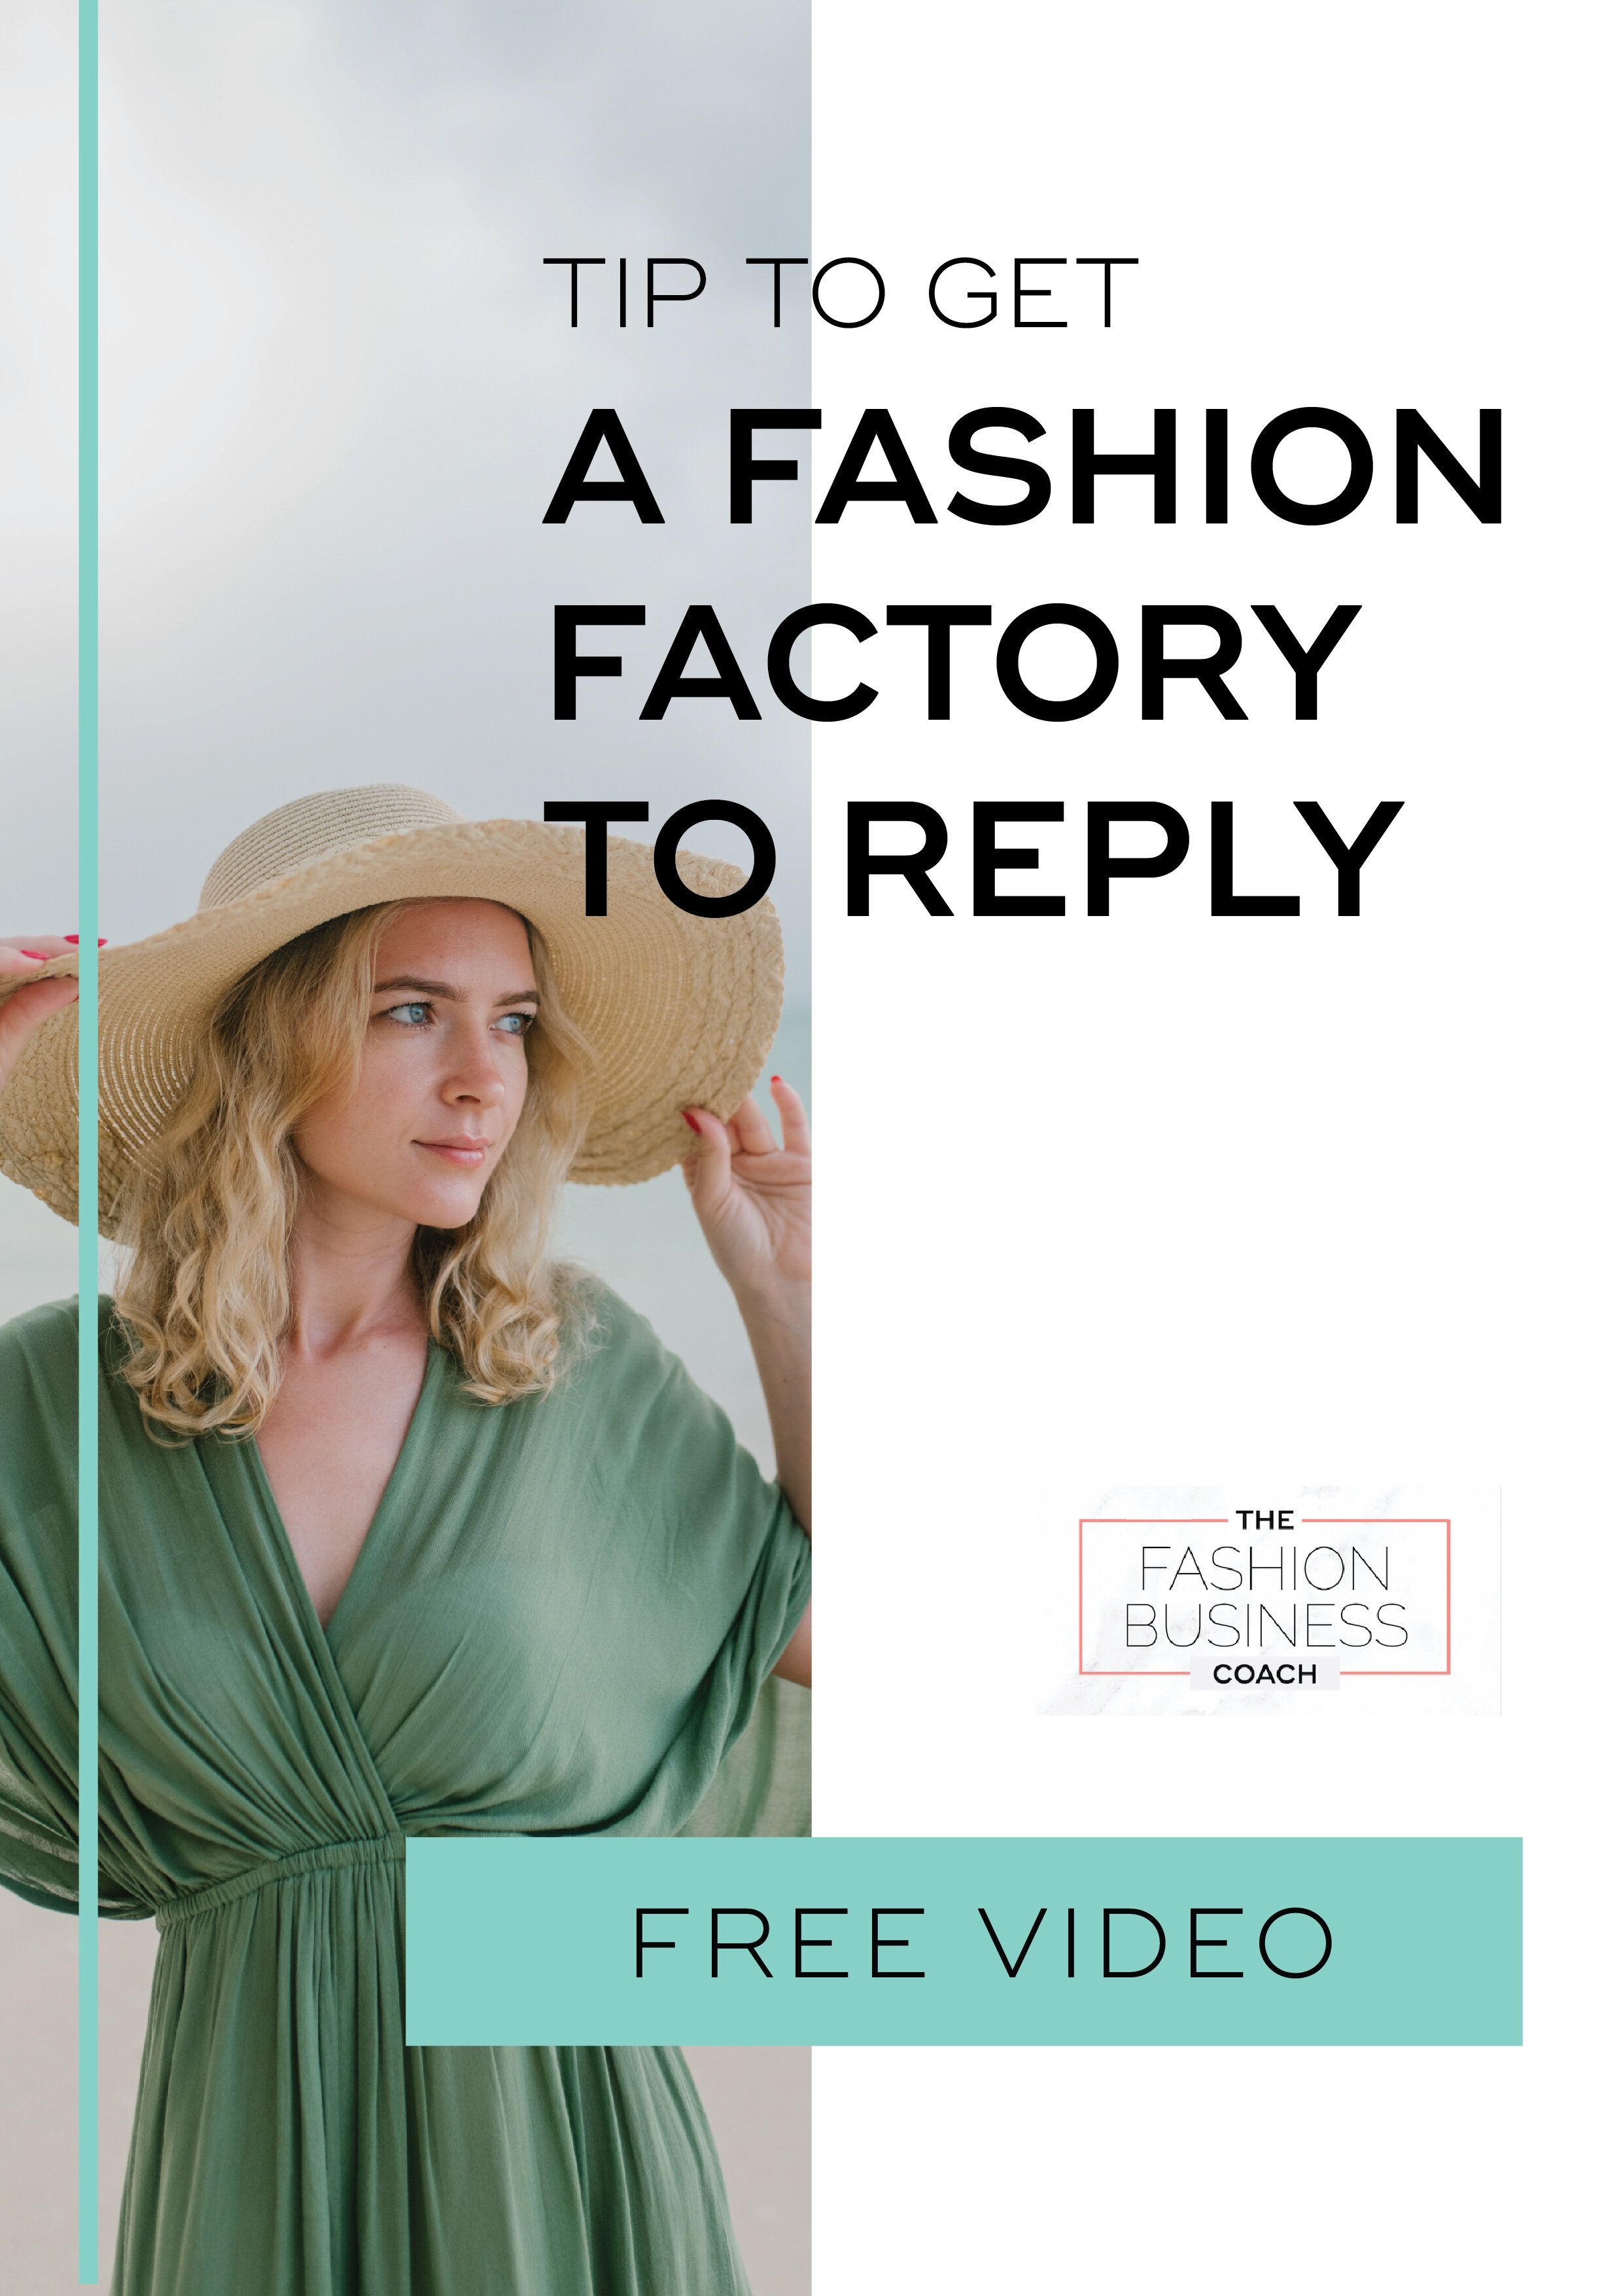 Tip to get a fashion factory to reply video.jpg